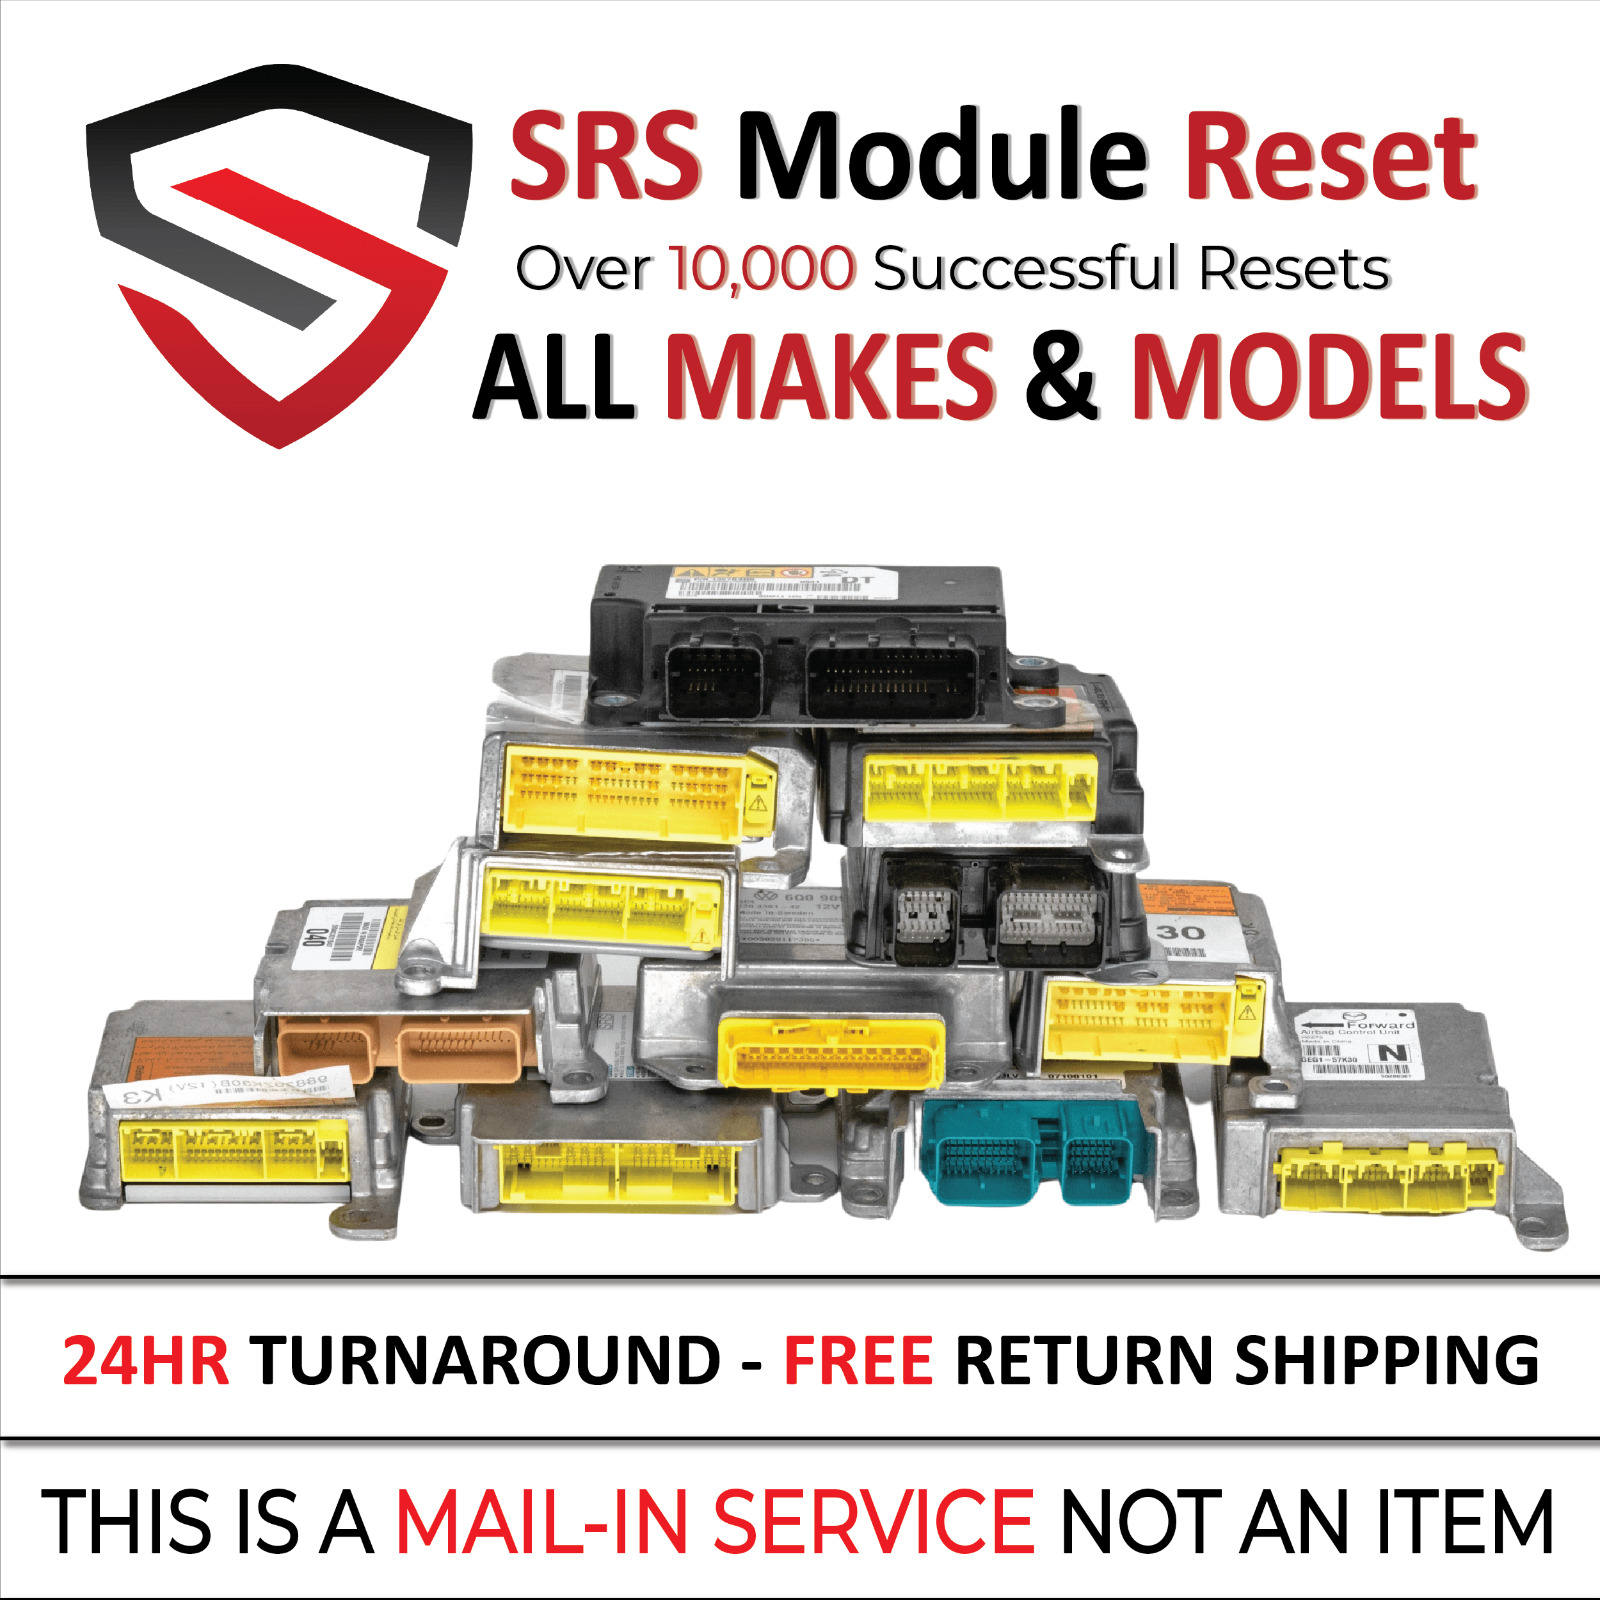 For Chrysler SRS Module Reset Service - Guaranteed or Your Money Back